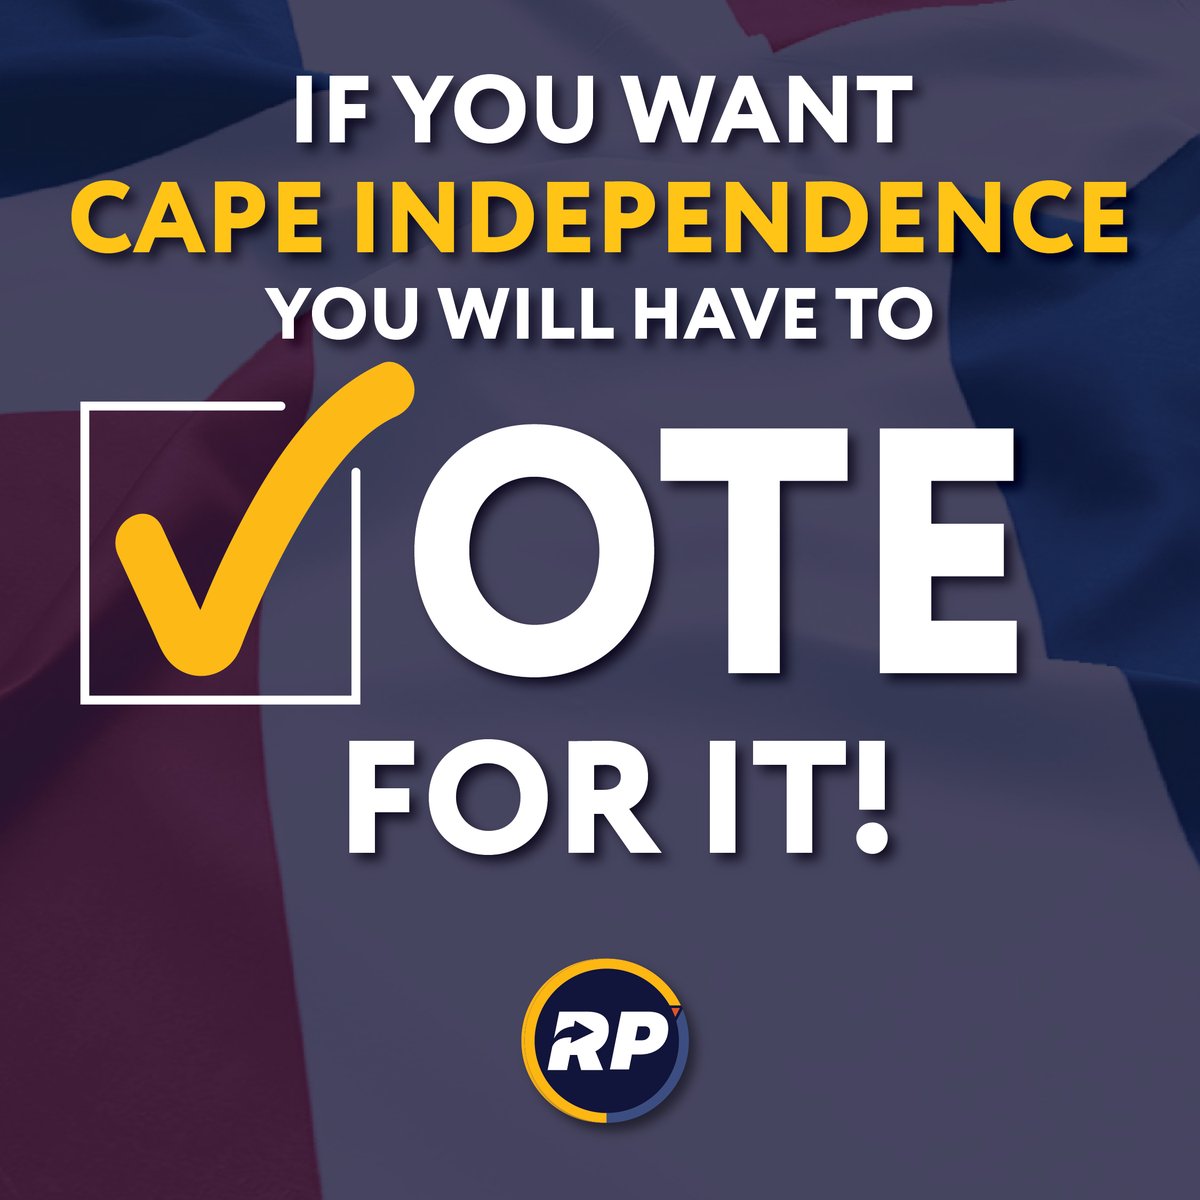 We will not allow South Africa to create the Western Cape into another Zimbabwe. This is our home. This is our future. Vote for Cape Independence! #referendumparty #capeindependence